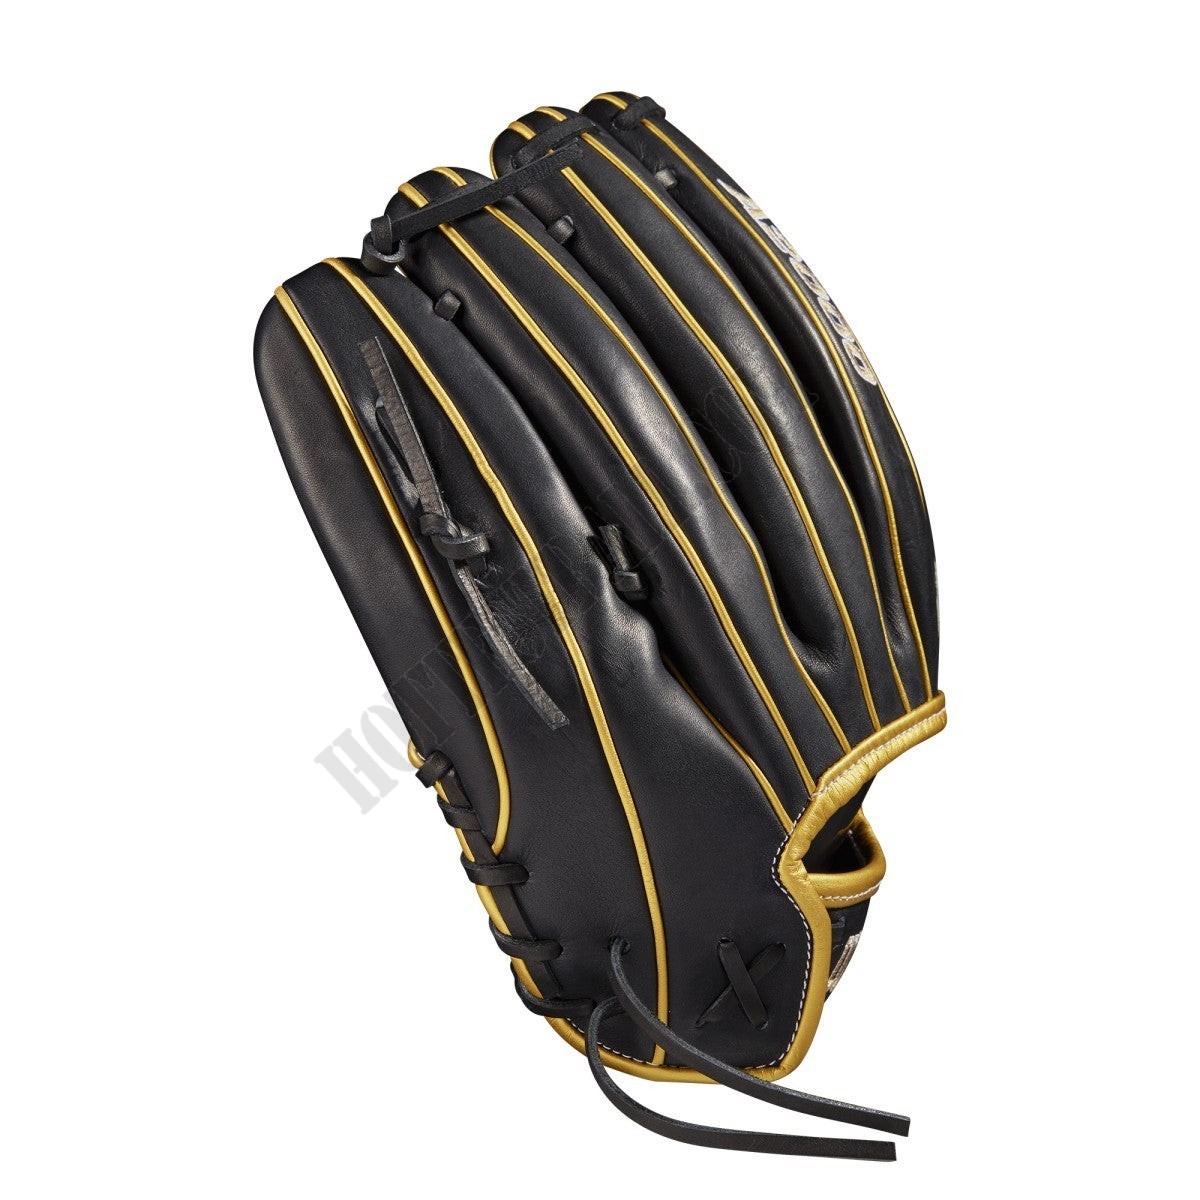 2021 A2000 H75 11.75" Infield Fastpitch Glove ● Wilson Promotions - -4